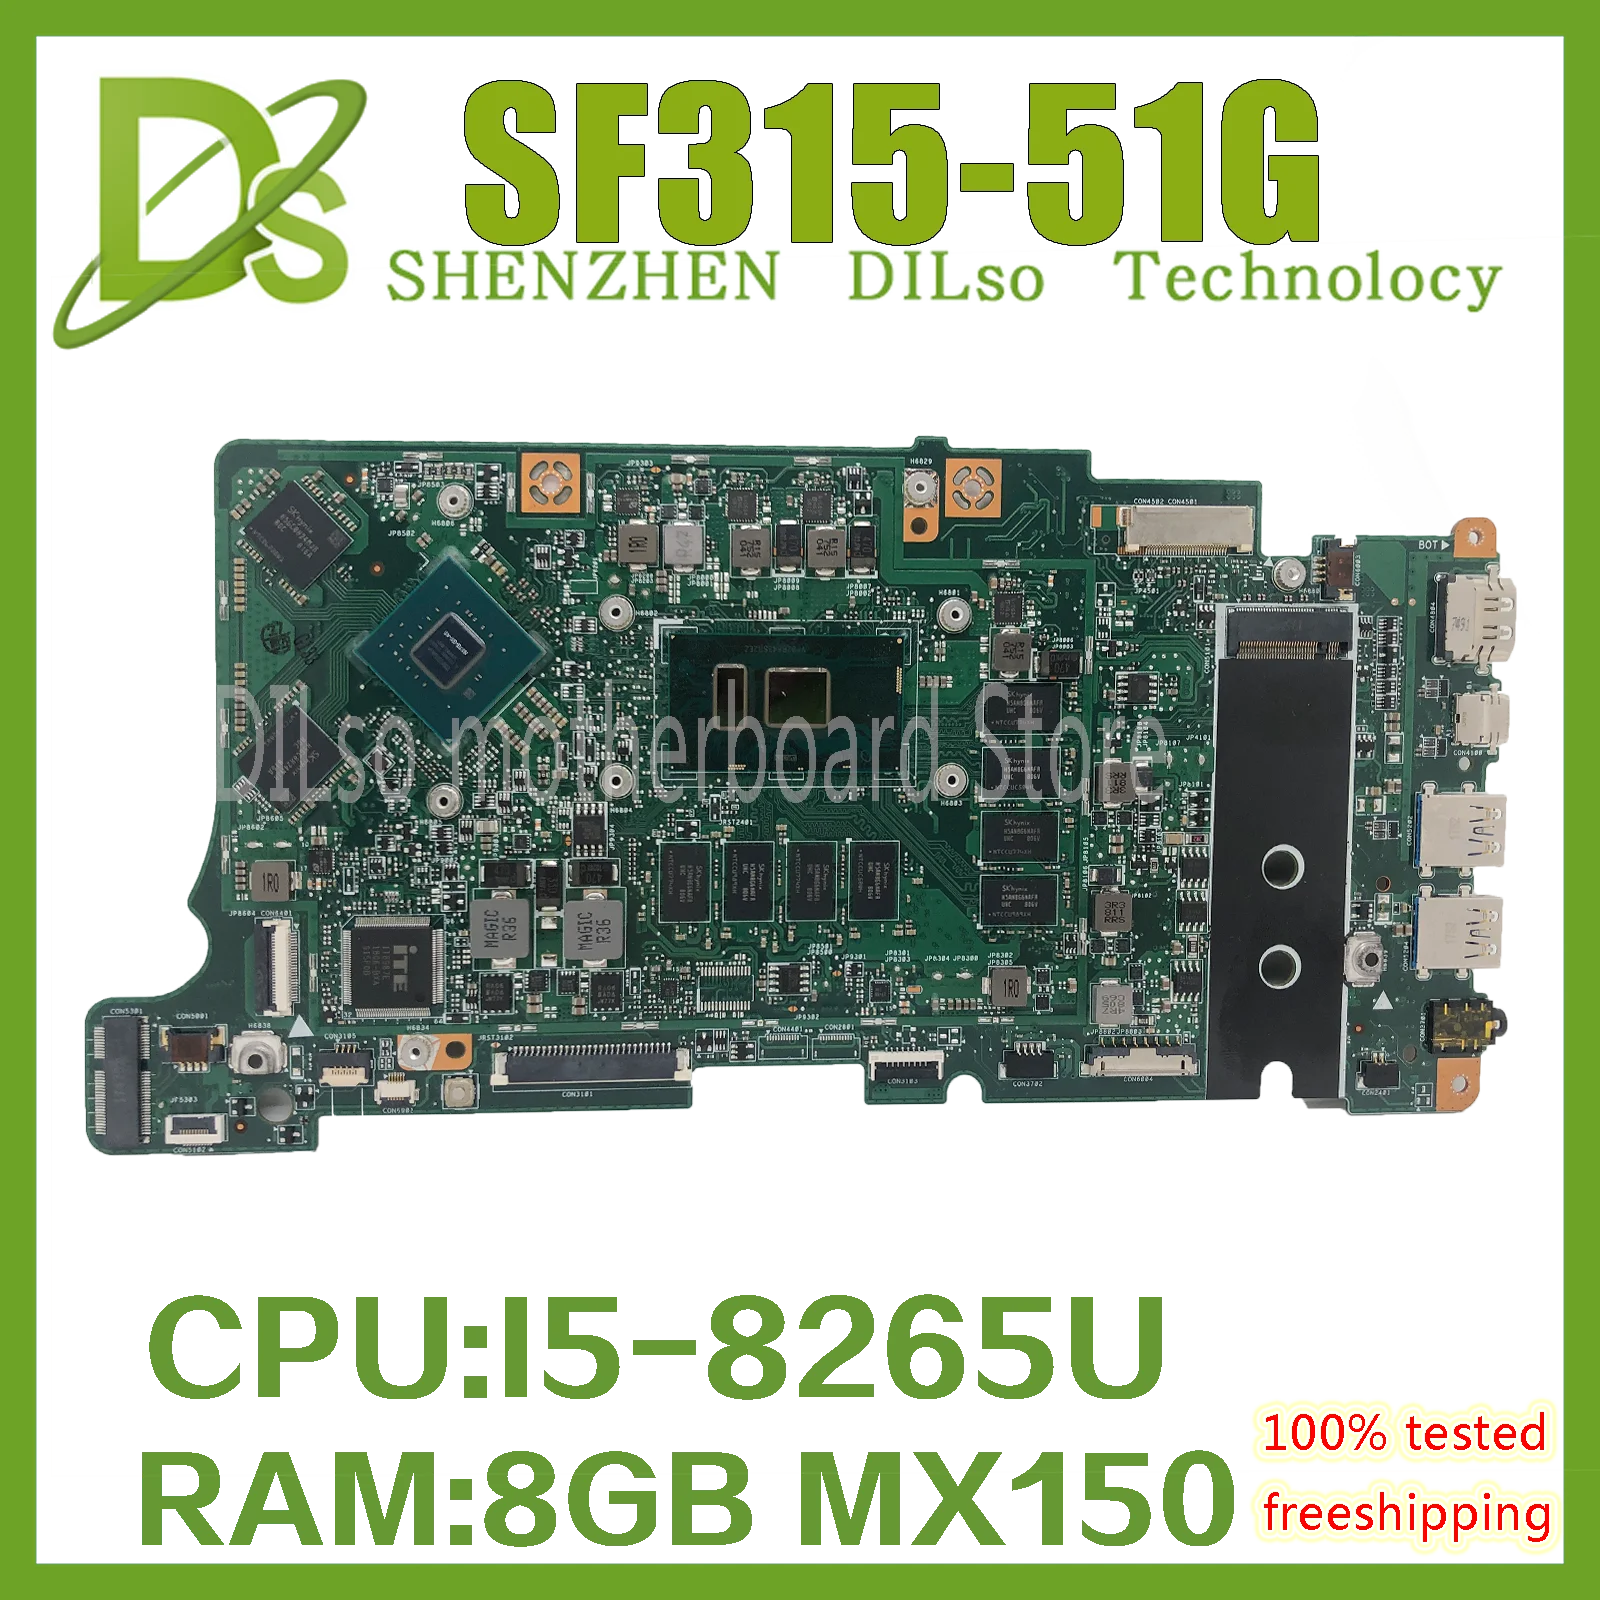 

KEFU BE5EA Mainboard is Suitable For Acer Swift 3 SF315-51 SF315-51G Laptop Motherboard With I5-8250U 8GB-RAM MX150 100% Tested